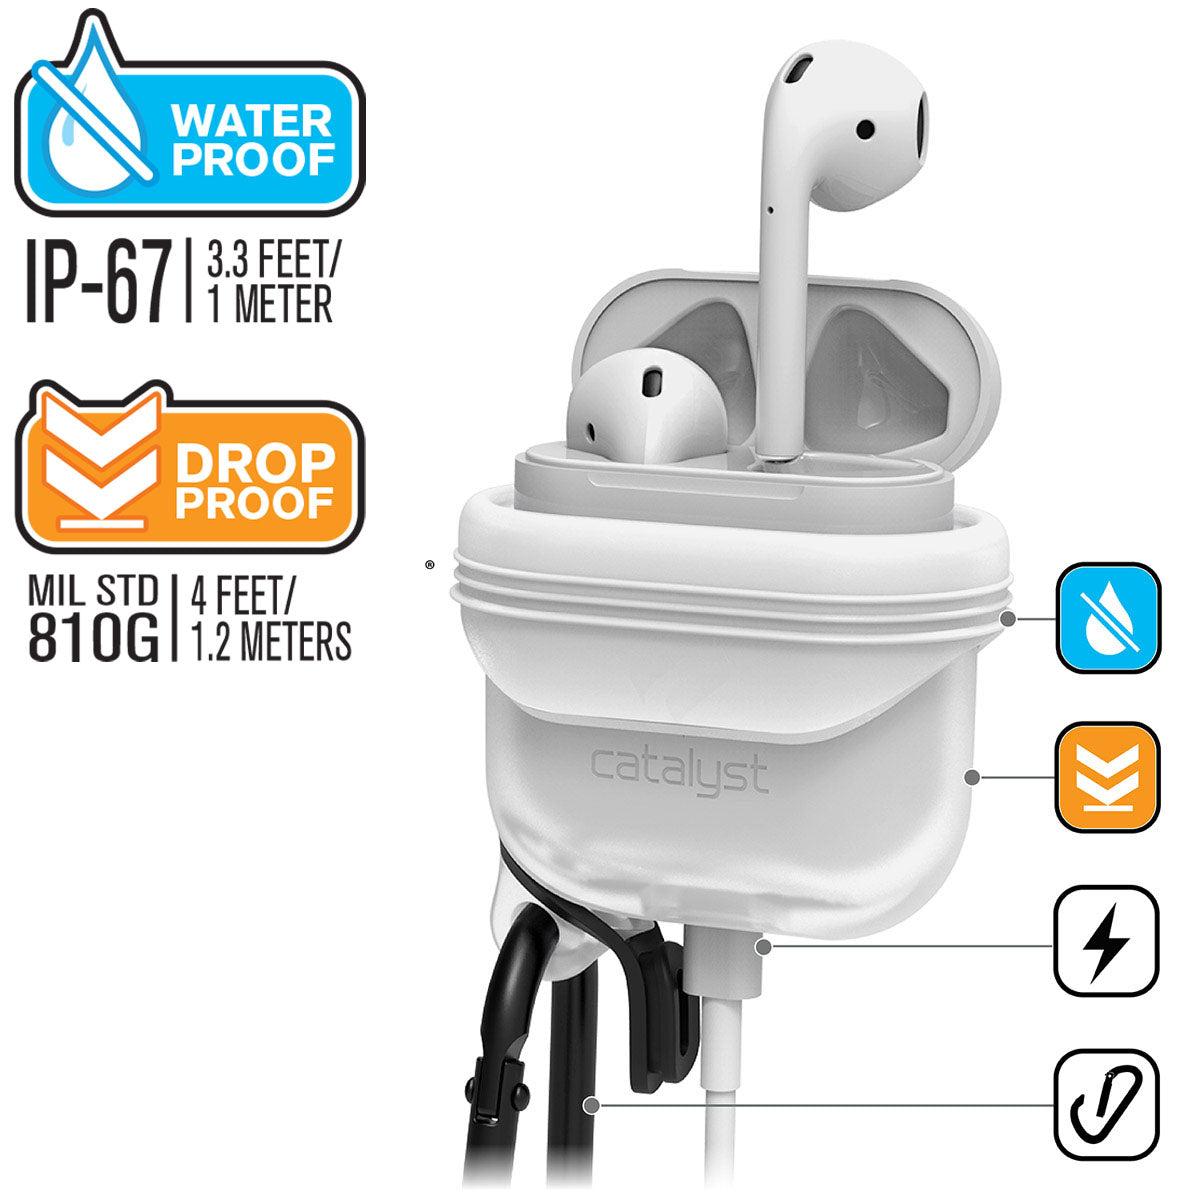 CATAPDWHT-FBA | Catalyst airpods gen2/1 waterproof case + carabiner showing the case drop proof and water proof features in frost white text reads water proof IP-67 3.3 FEET/1 METER DROP PROOF MIL STD 810G 1.2 METERS